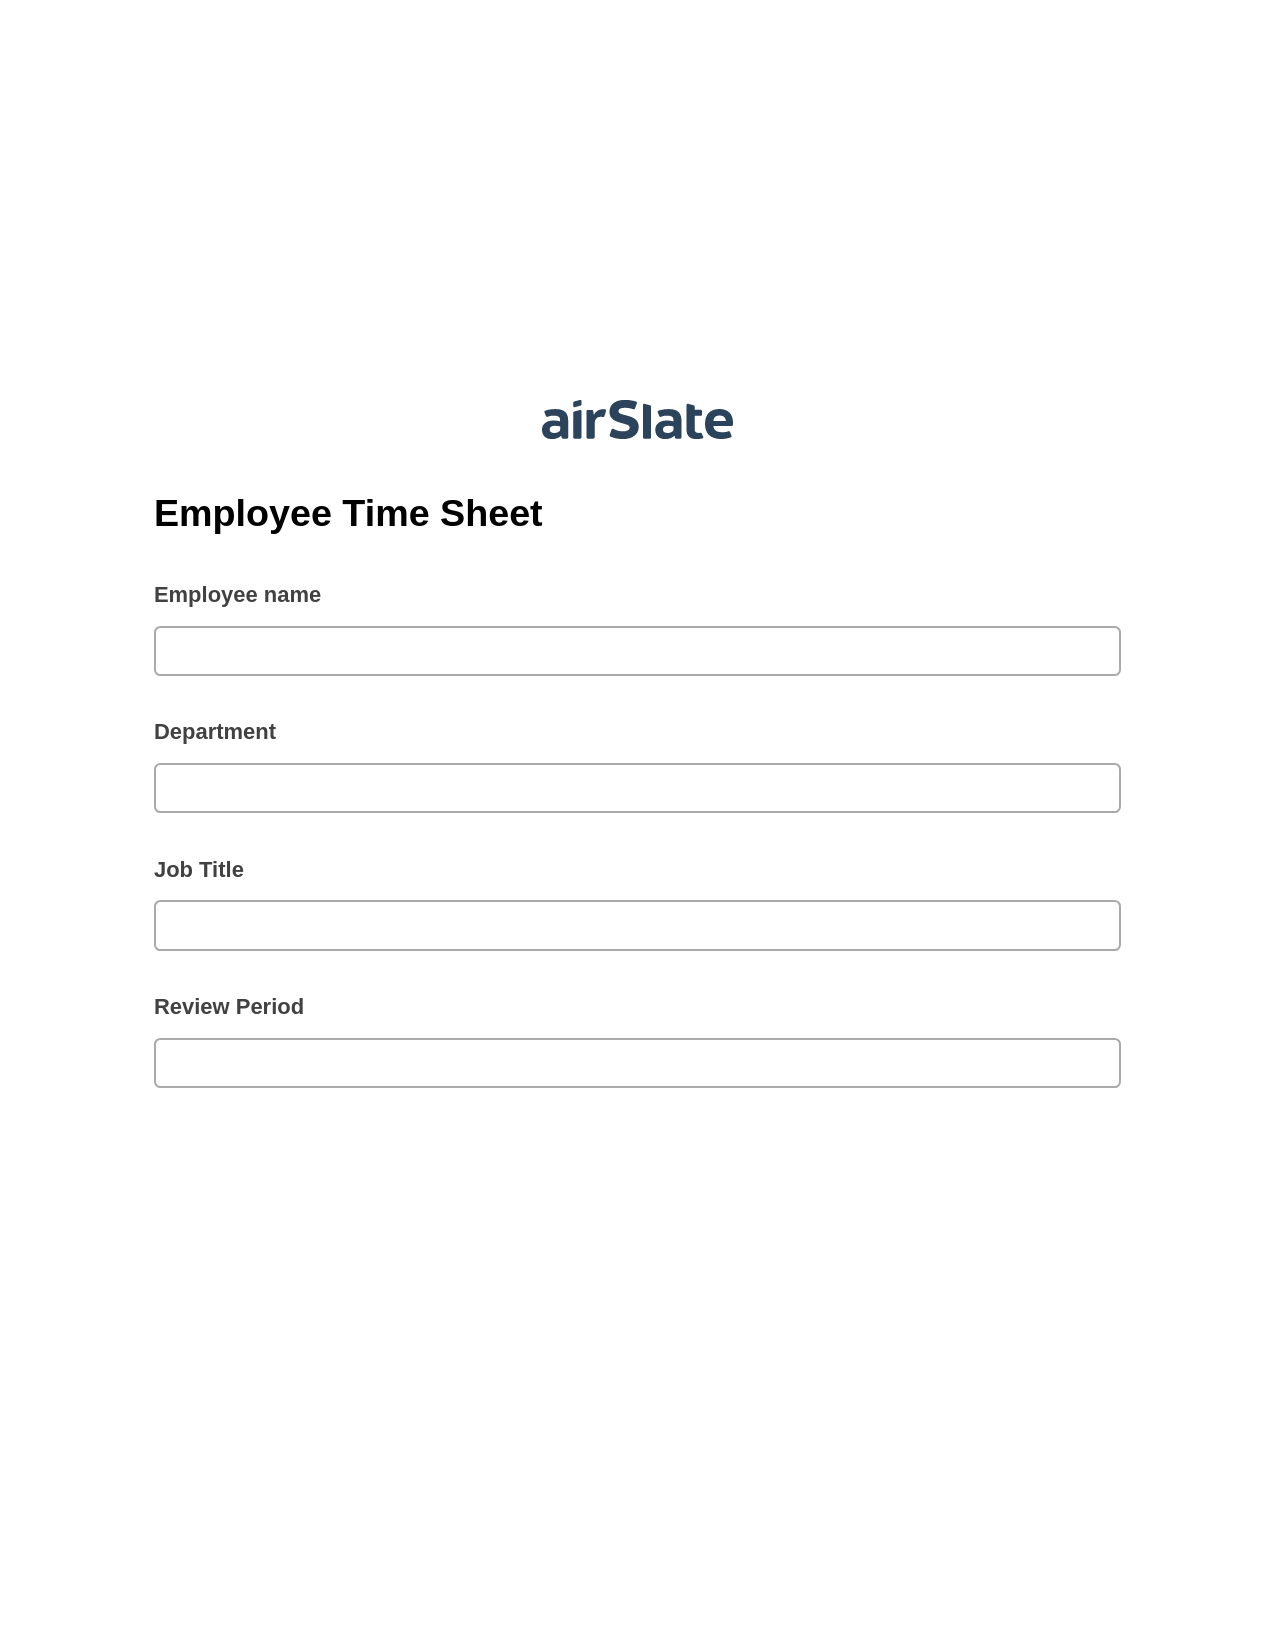 Employee Time Sheet Pre-fill Dropdowns from Excel Bot, Update Audit Trail Bot, Export to Excel 365 Bot